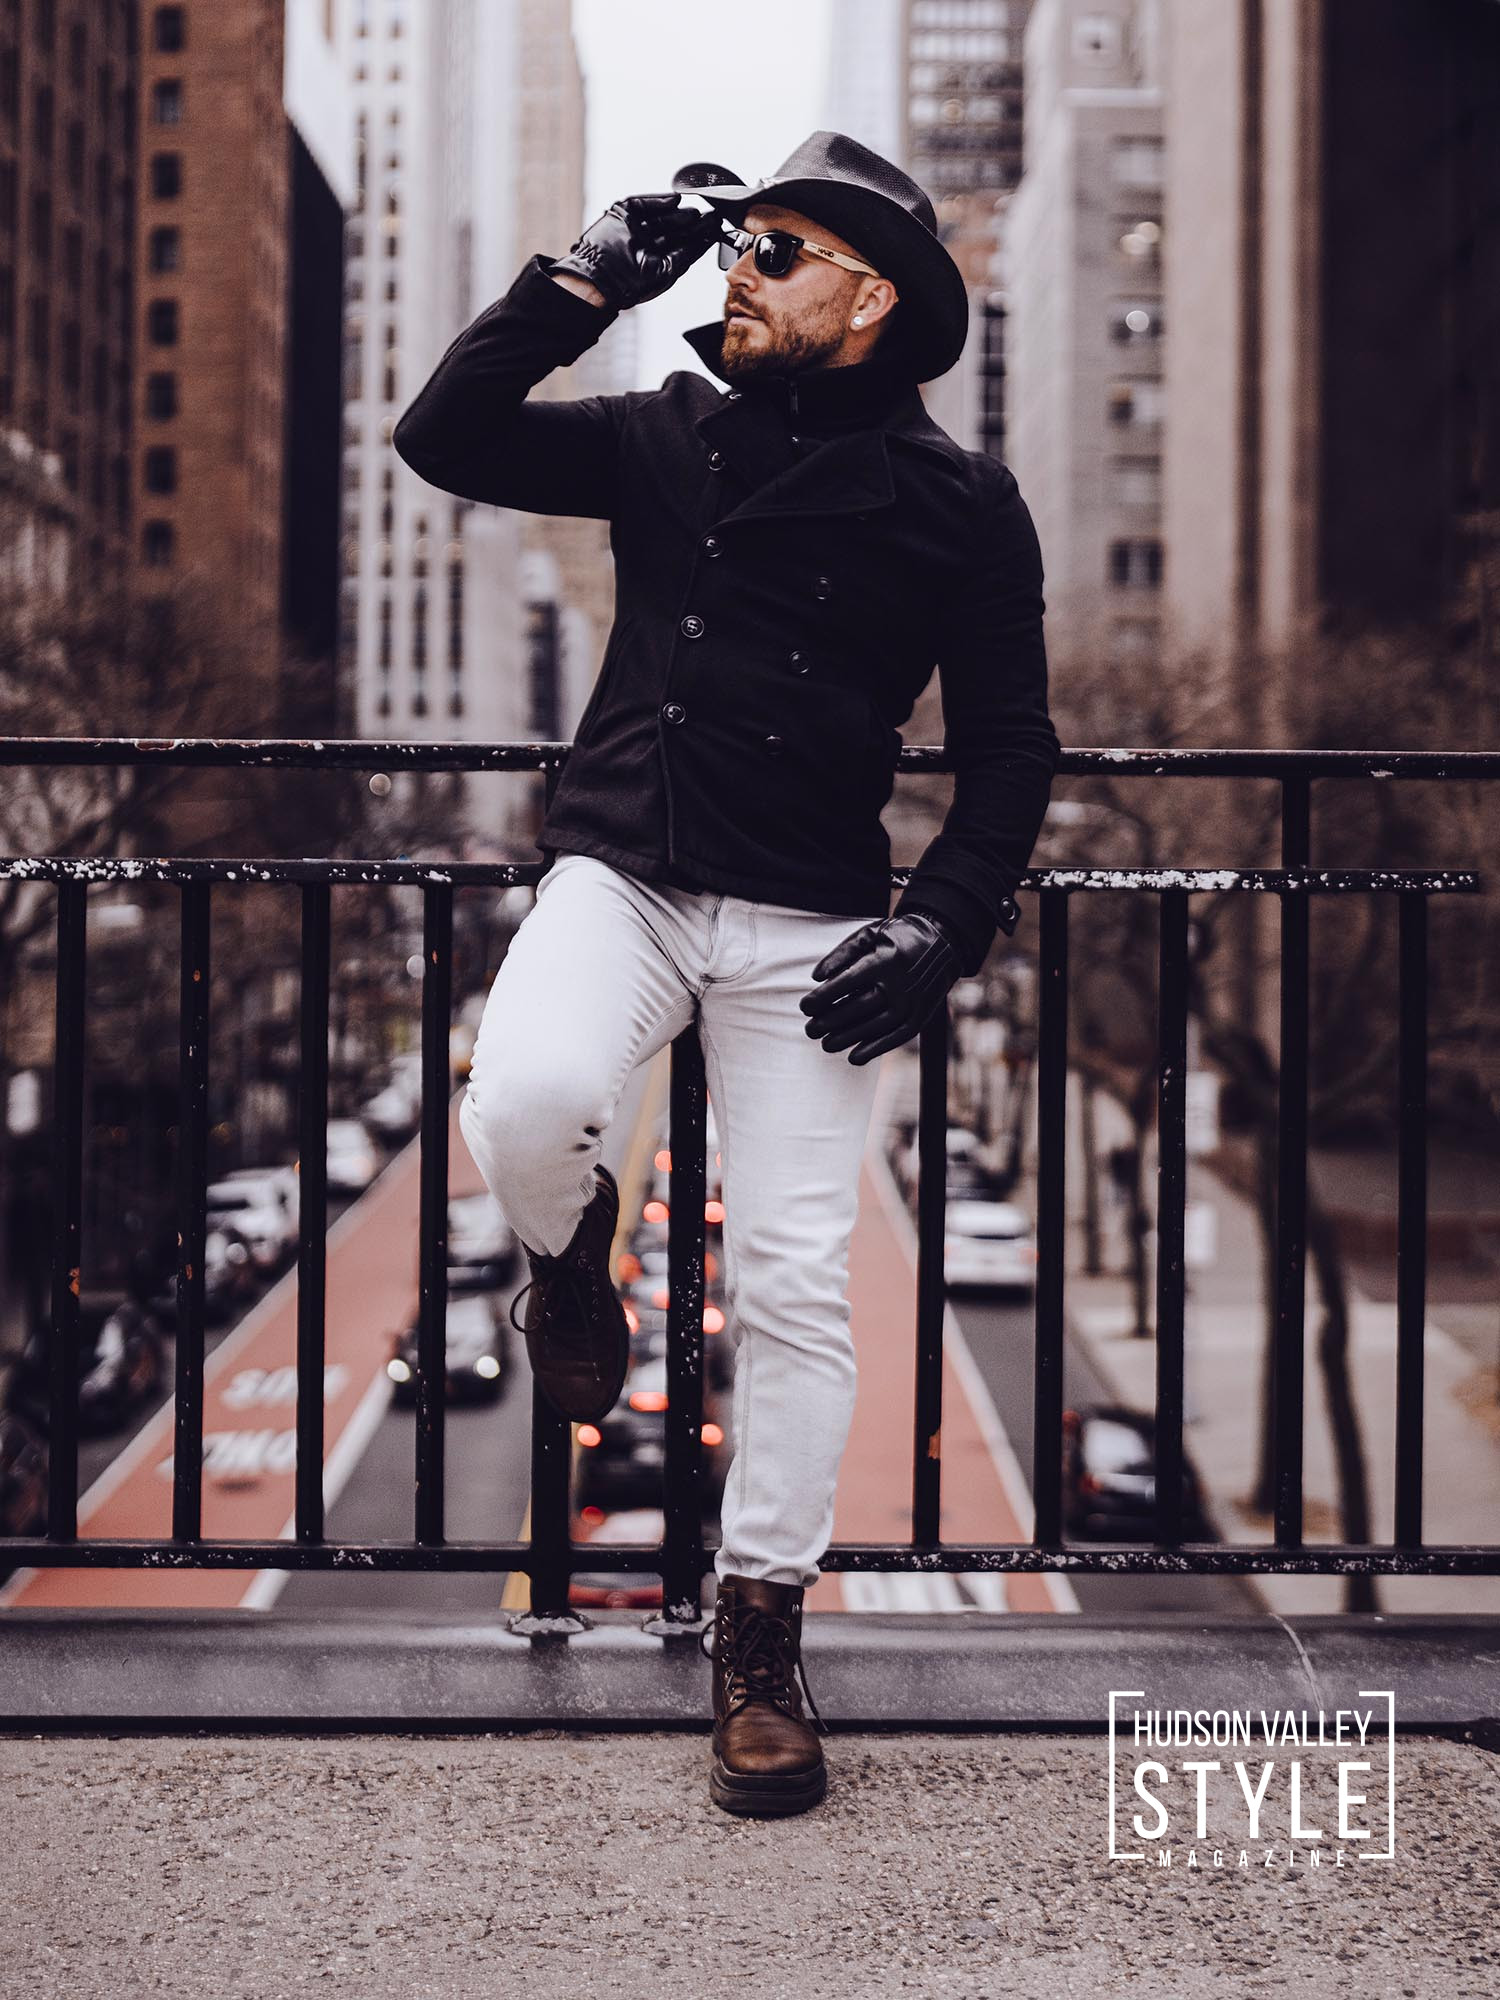 Flaunt It with Flair: The Modern Gay Man's Guide to Urban Cowboy Chic – Men's Style with Fitness Model Maxwell Alexander – Presented by HARD NEW YORK